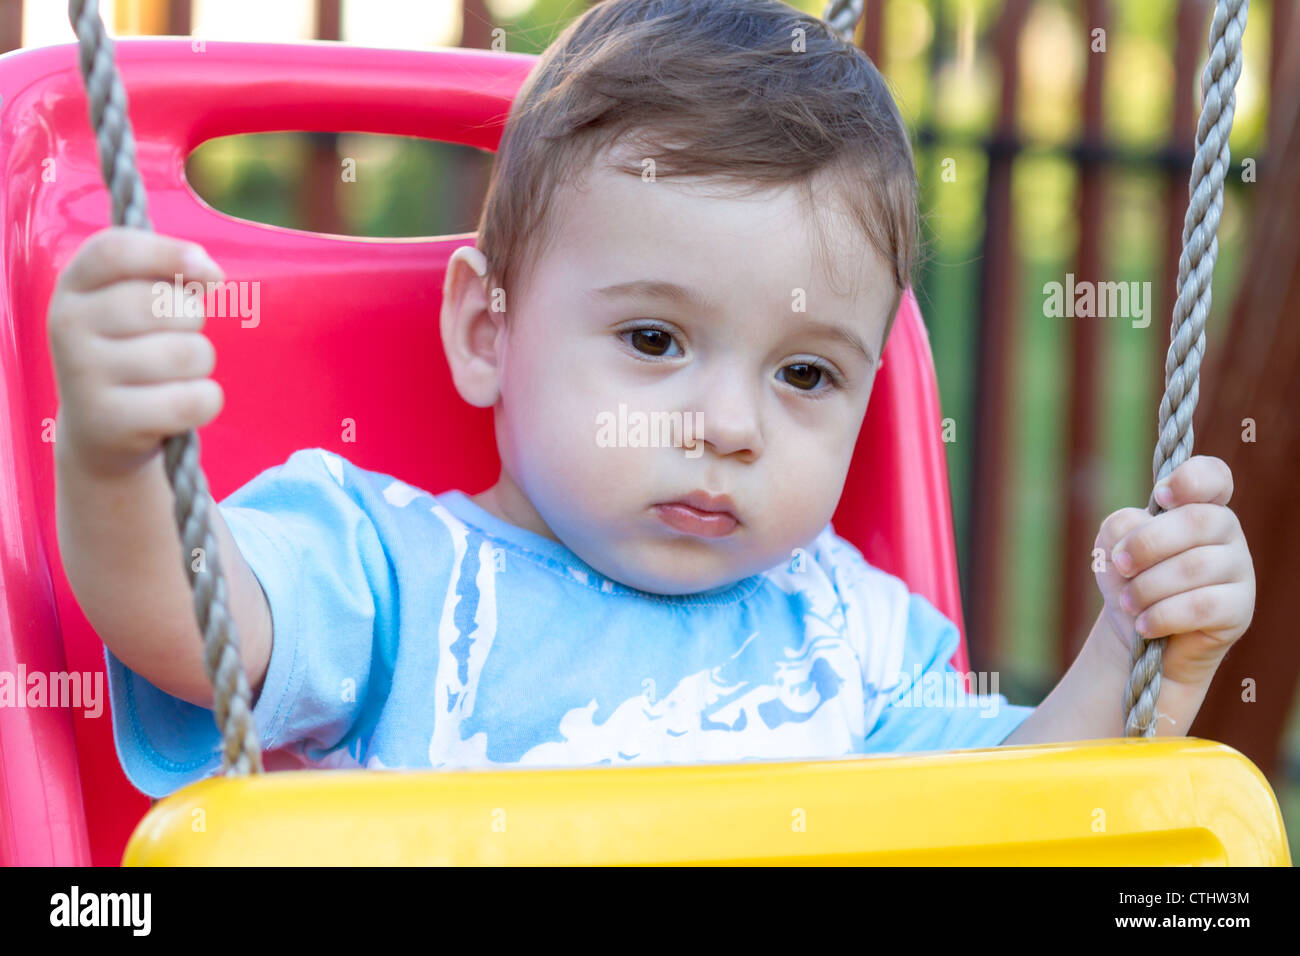 close-up of 9-month old baby boy in a swing outdoors Stock Photo